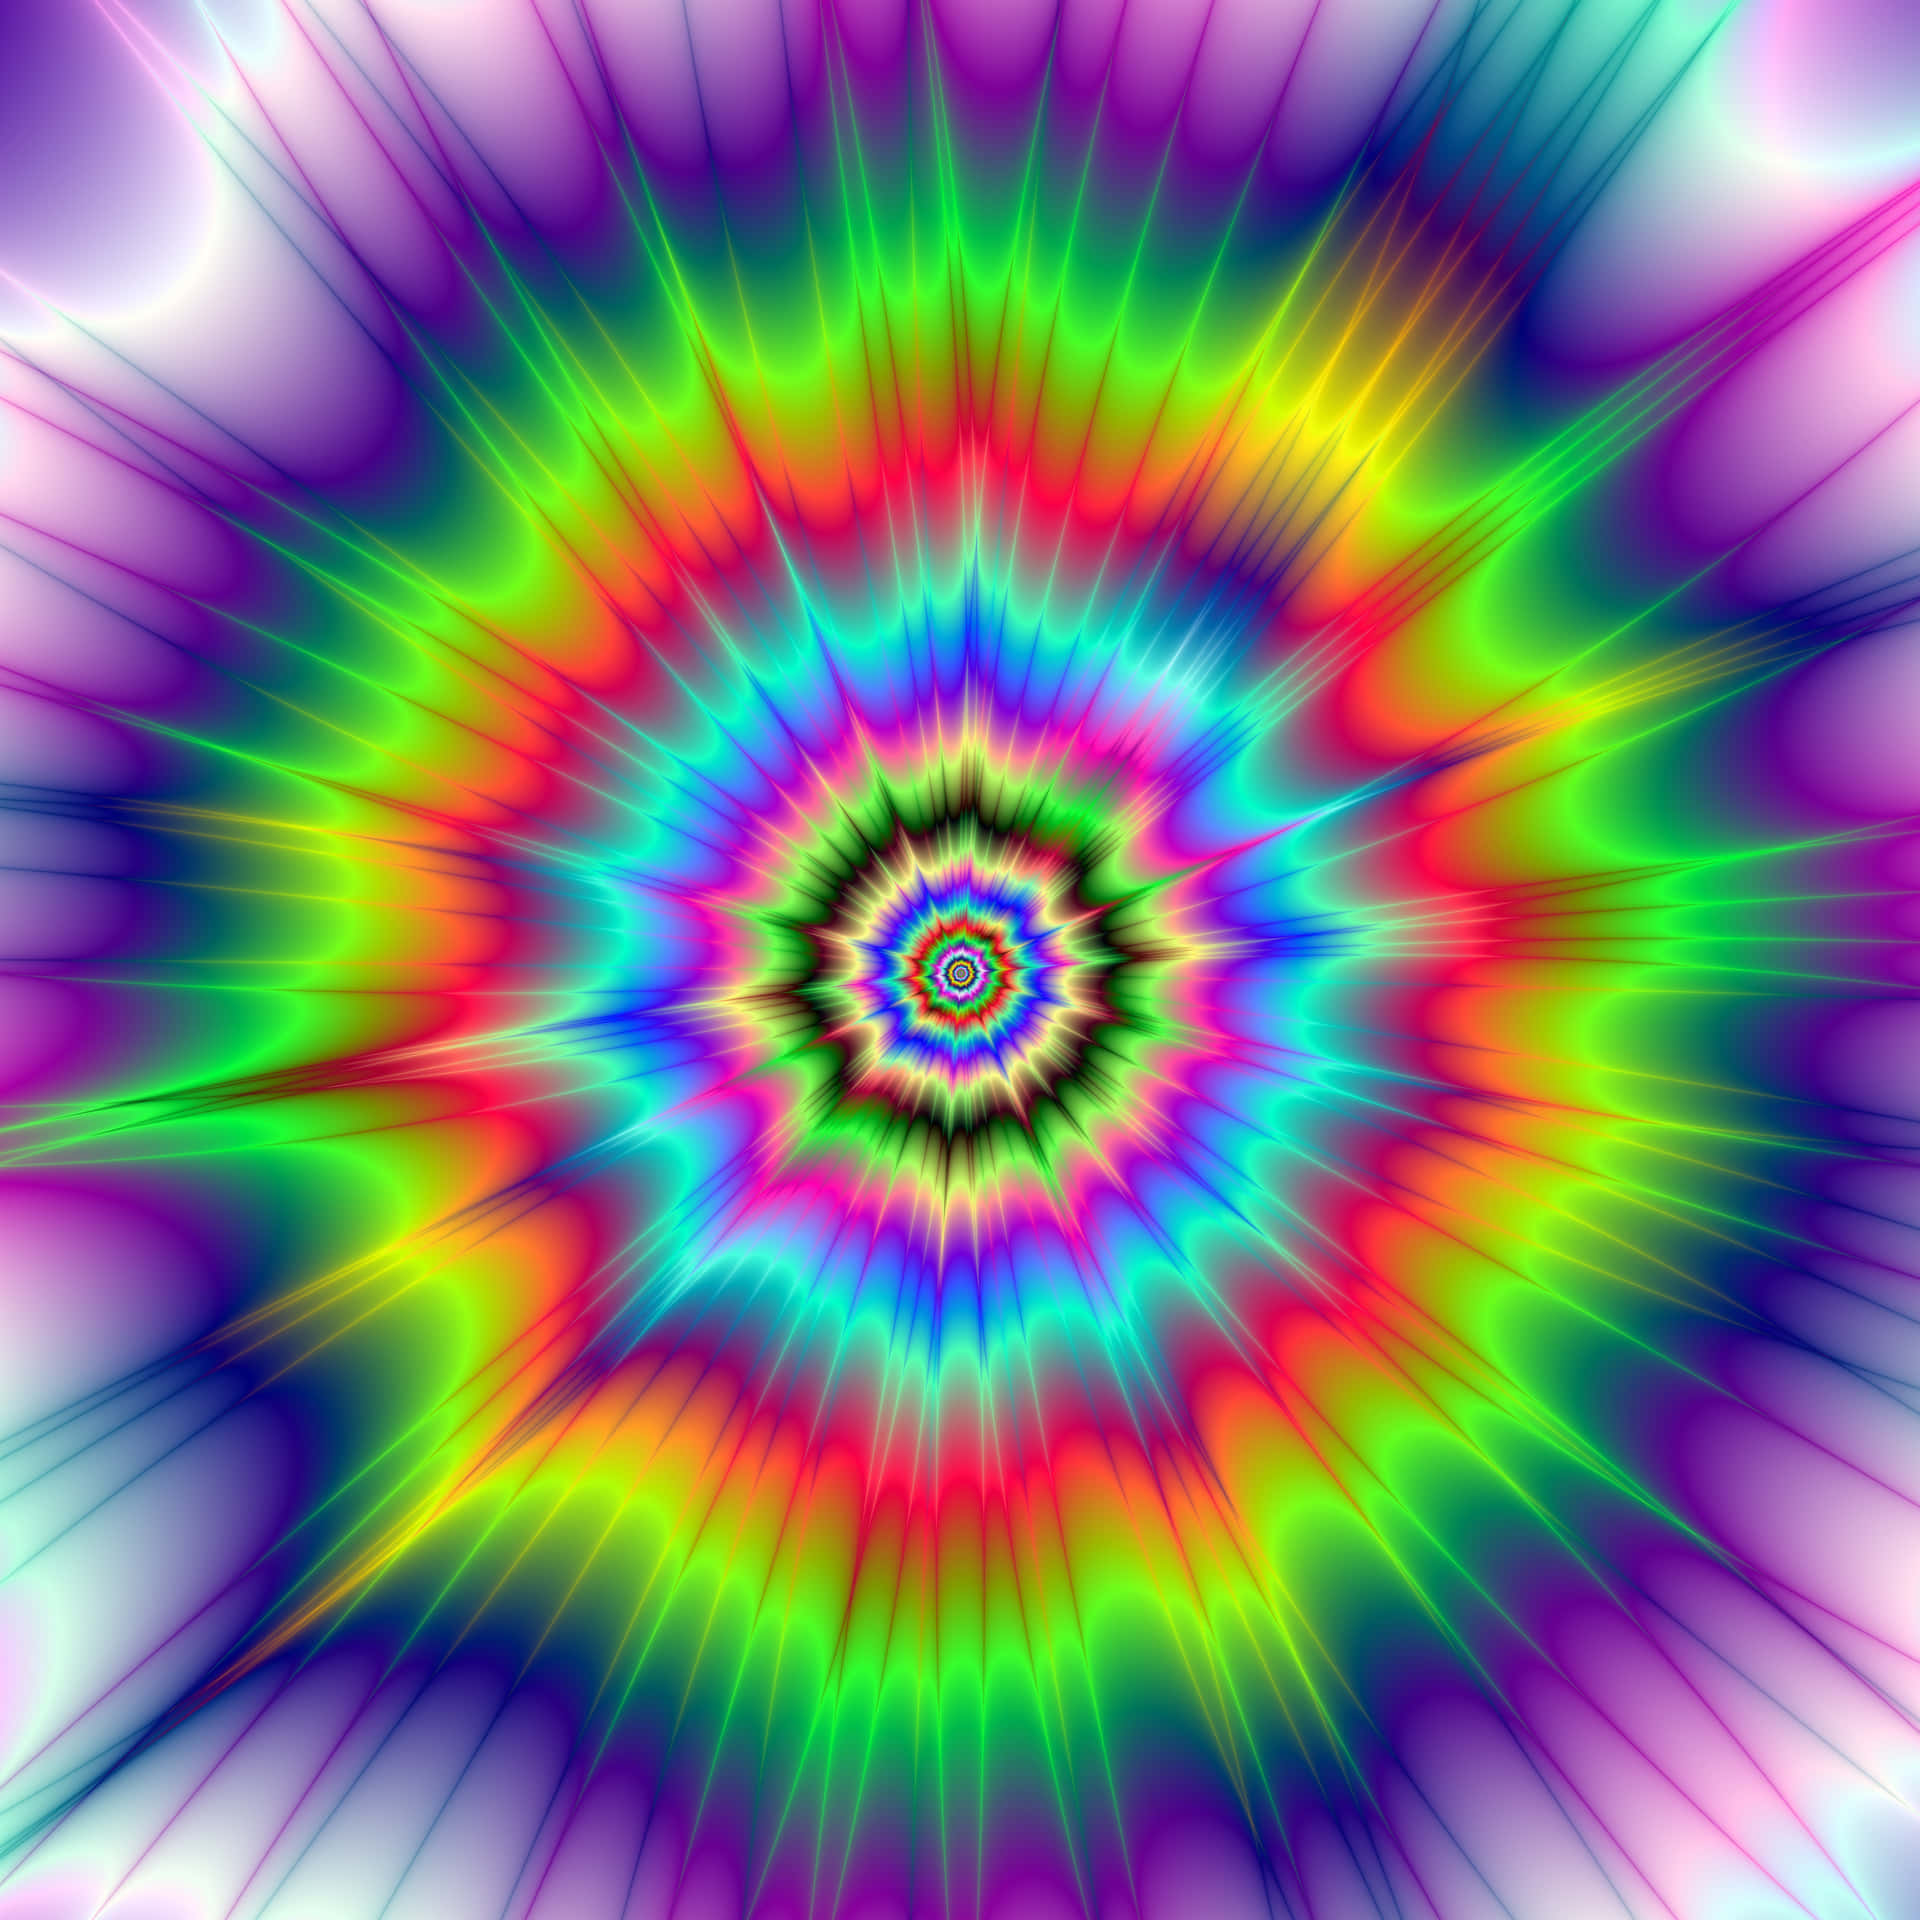 A Colorful Psychedelic Spiral With A Rainbow Background Wallpaper